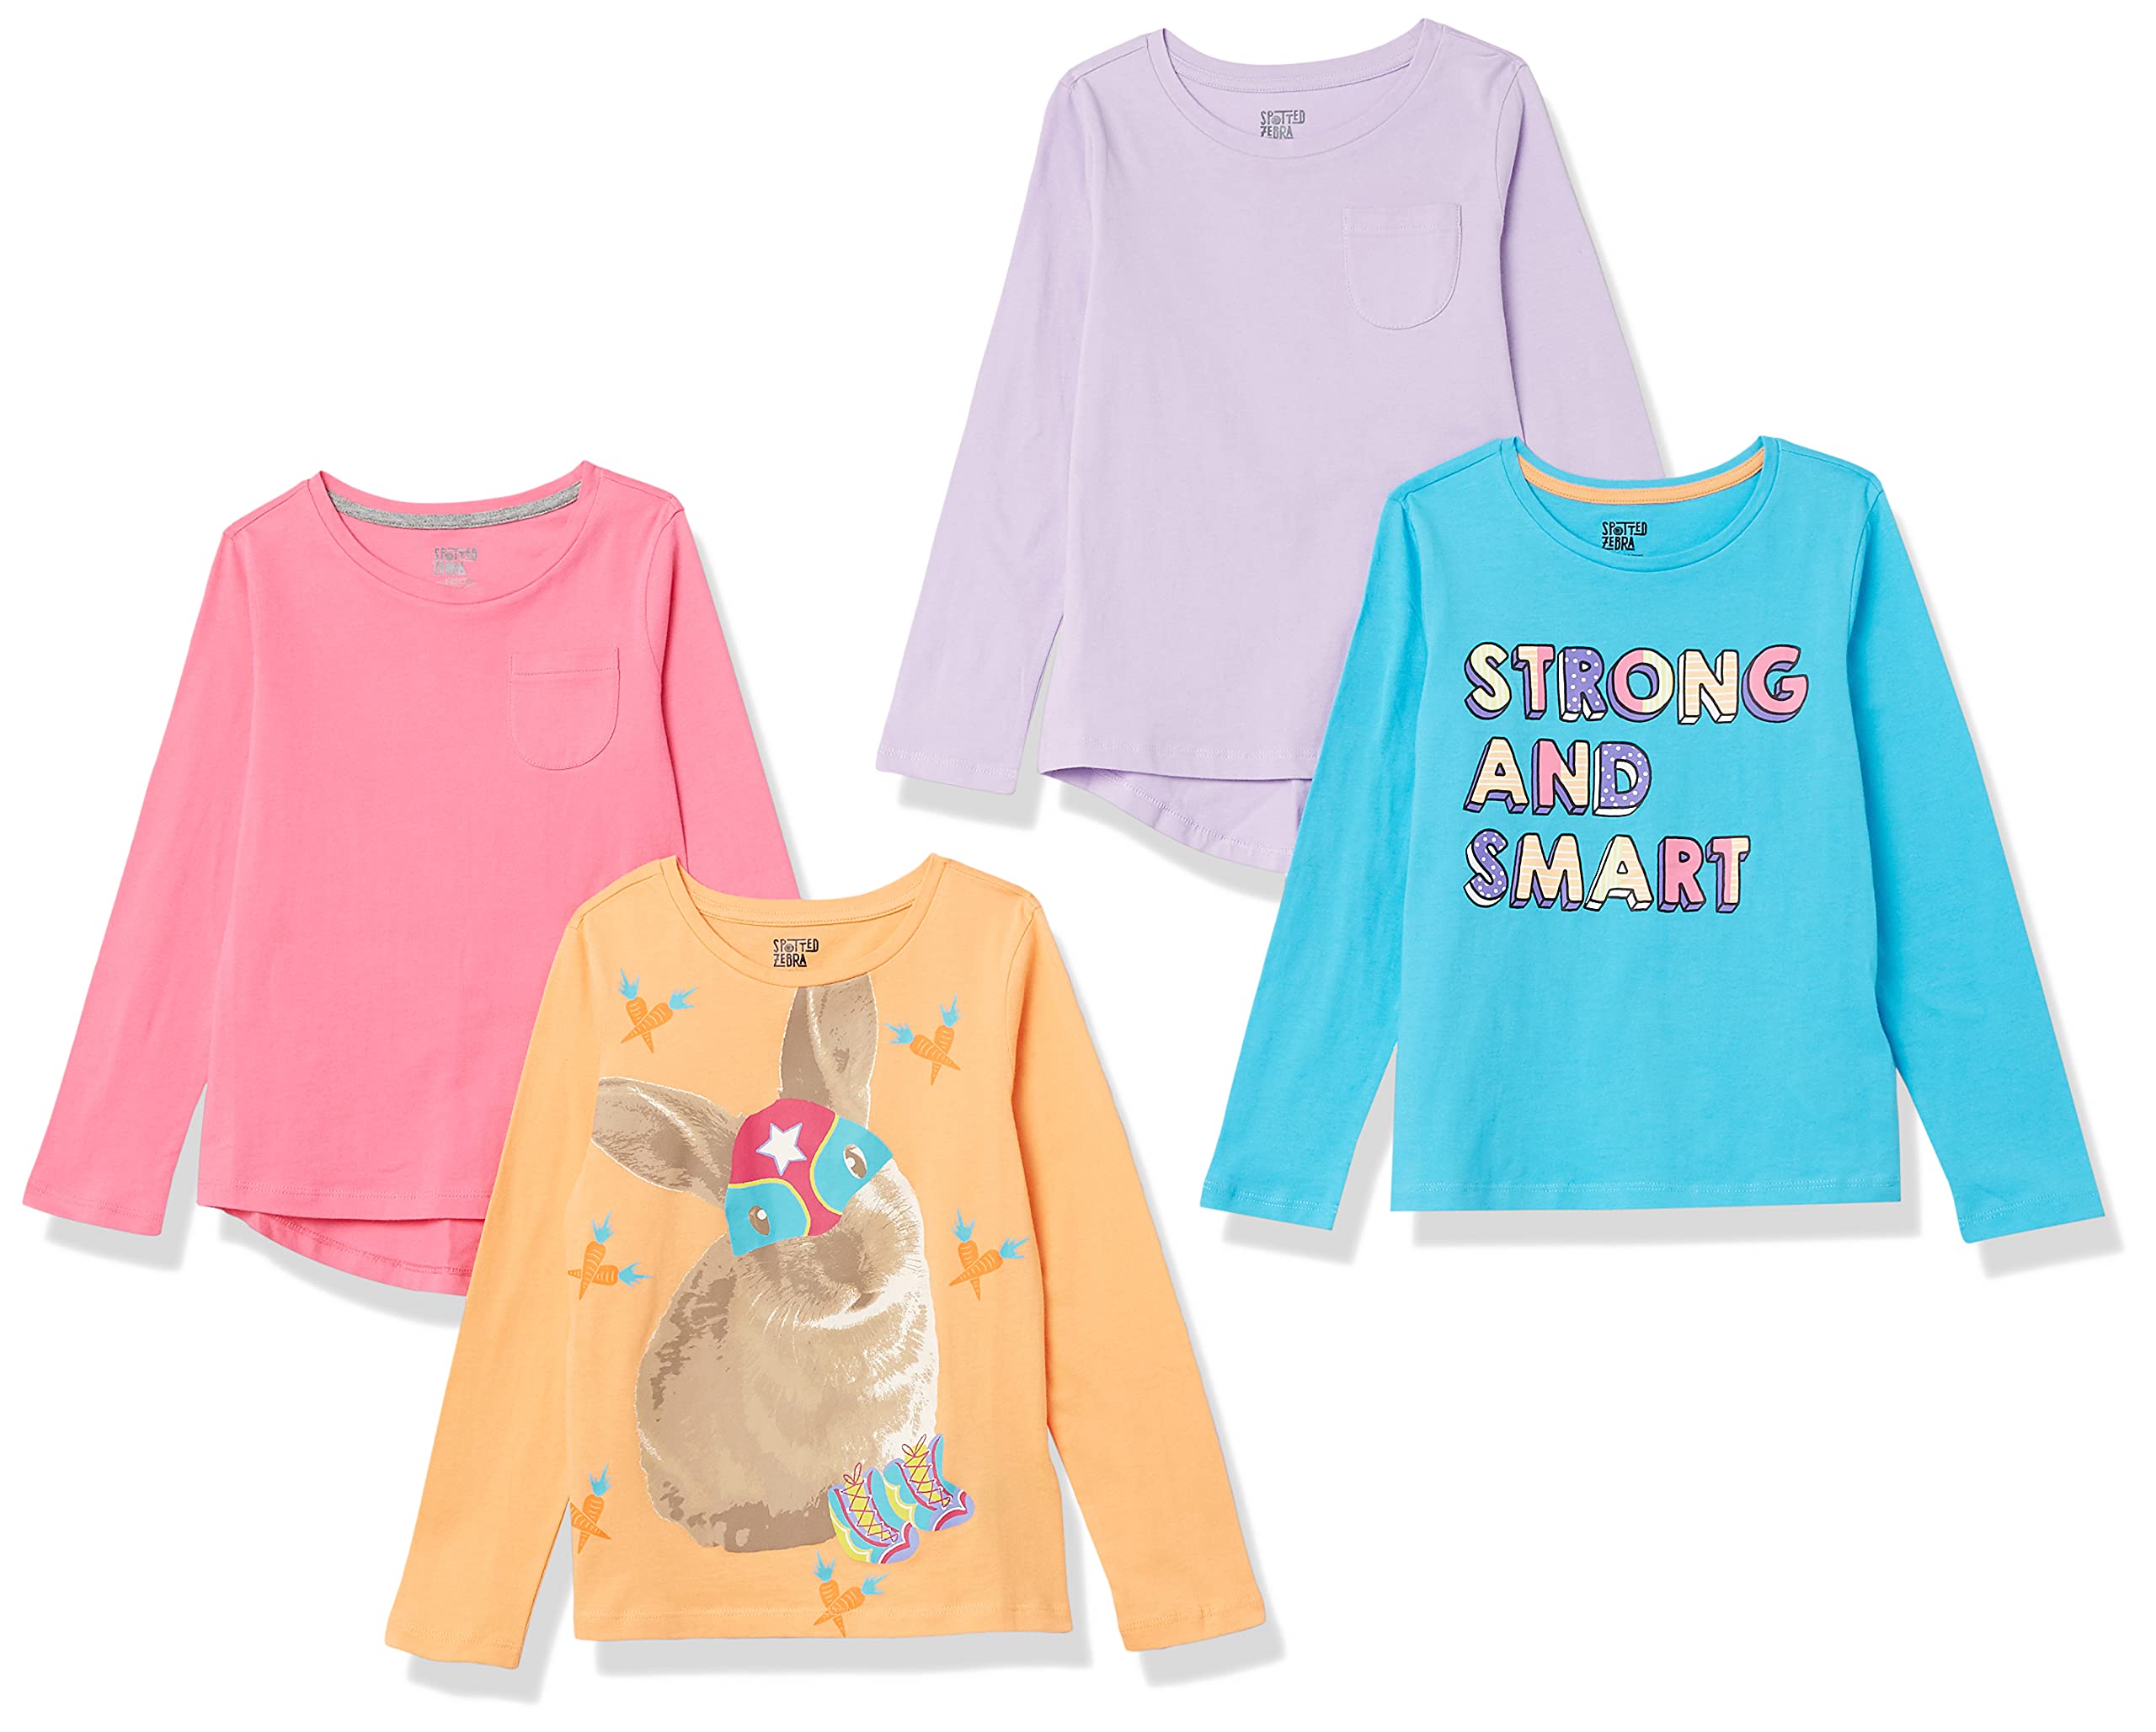 Amazon Essentials Girls and Toddlers' Long-Sleeve T-Shirts (Previously Spotted Zebra), Multipacks